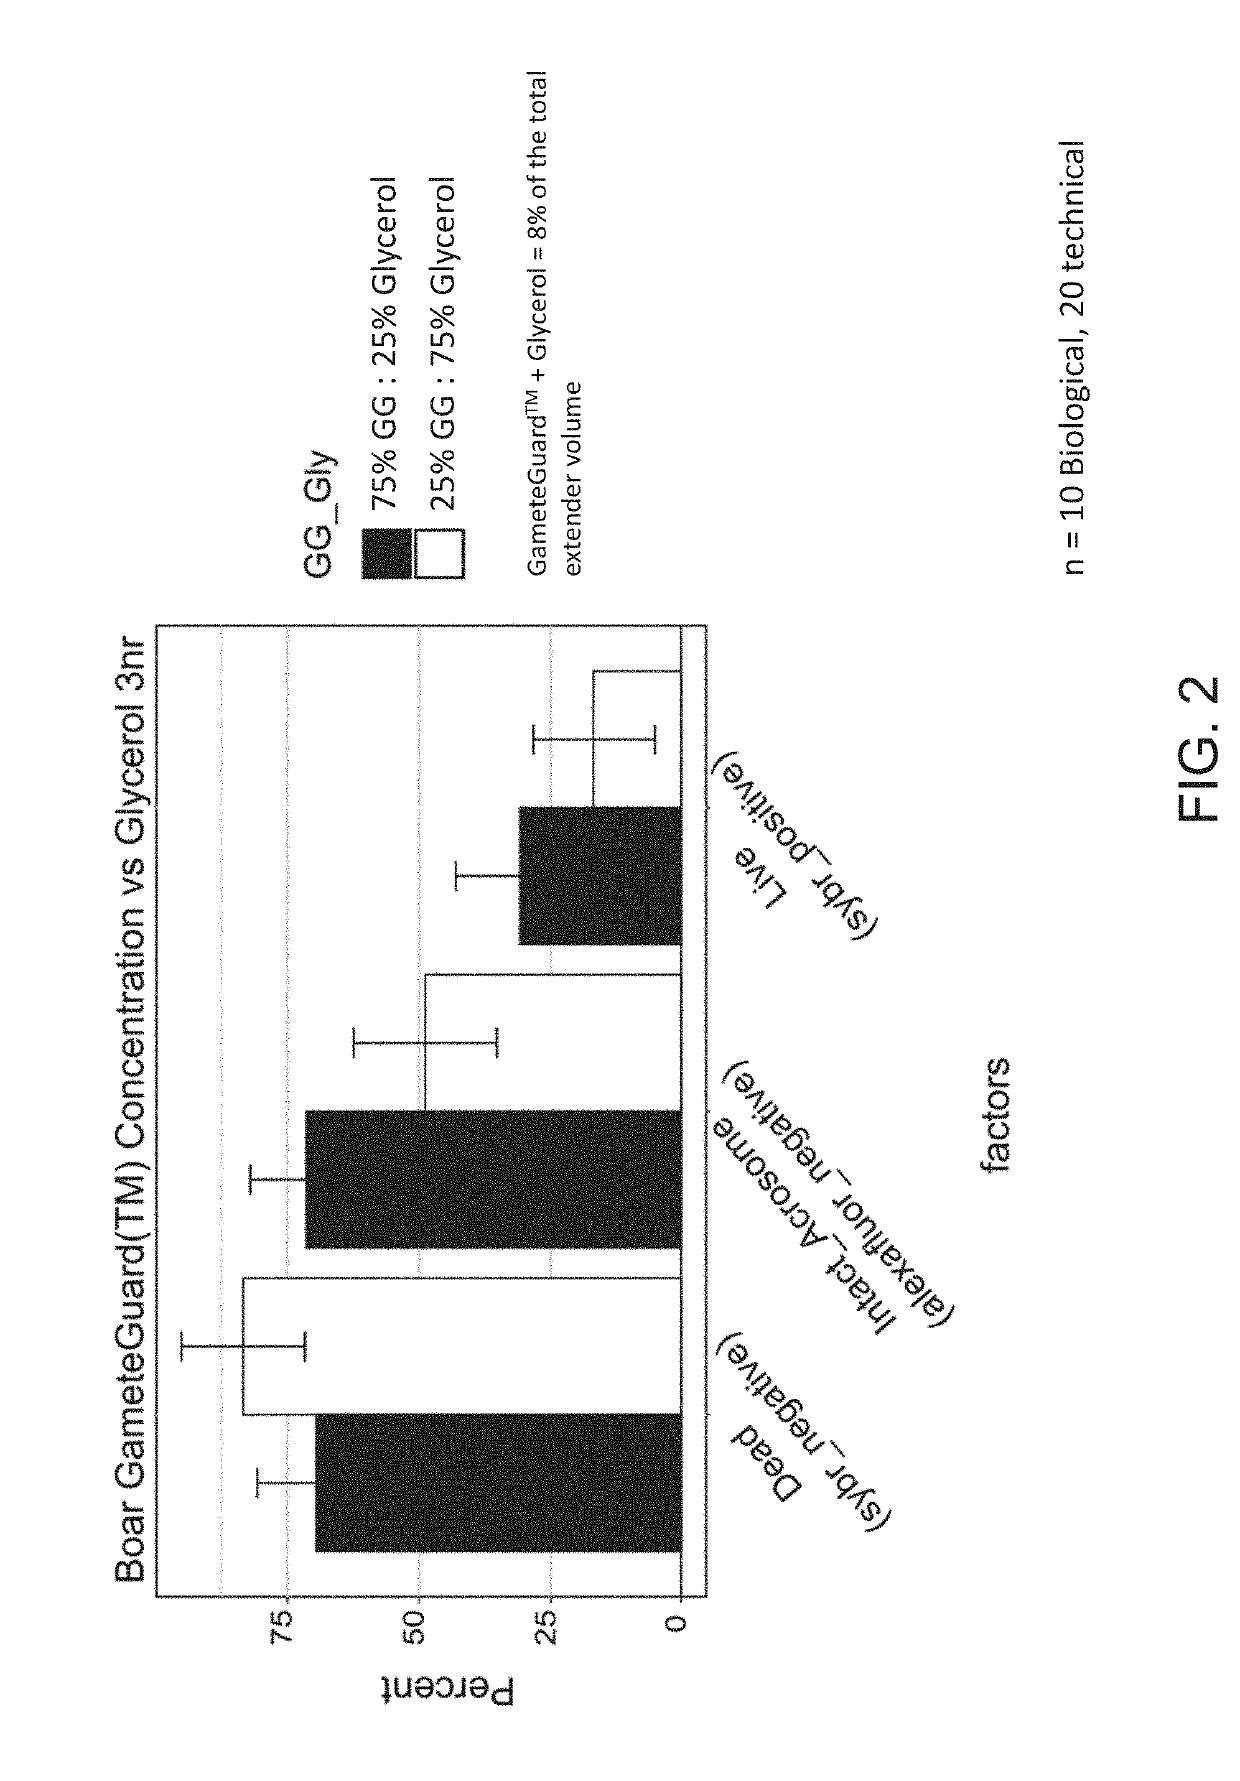 Systems and Methods For Natural Cryoprotectants For Preservation Of Cells